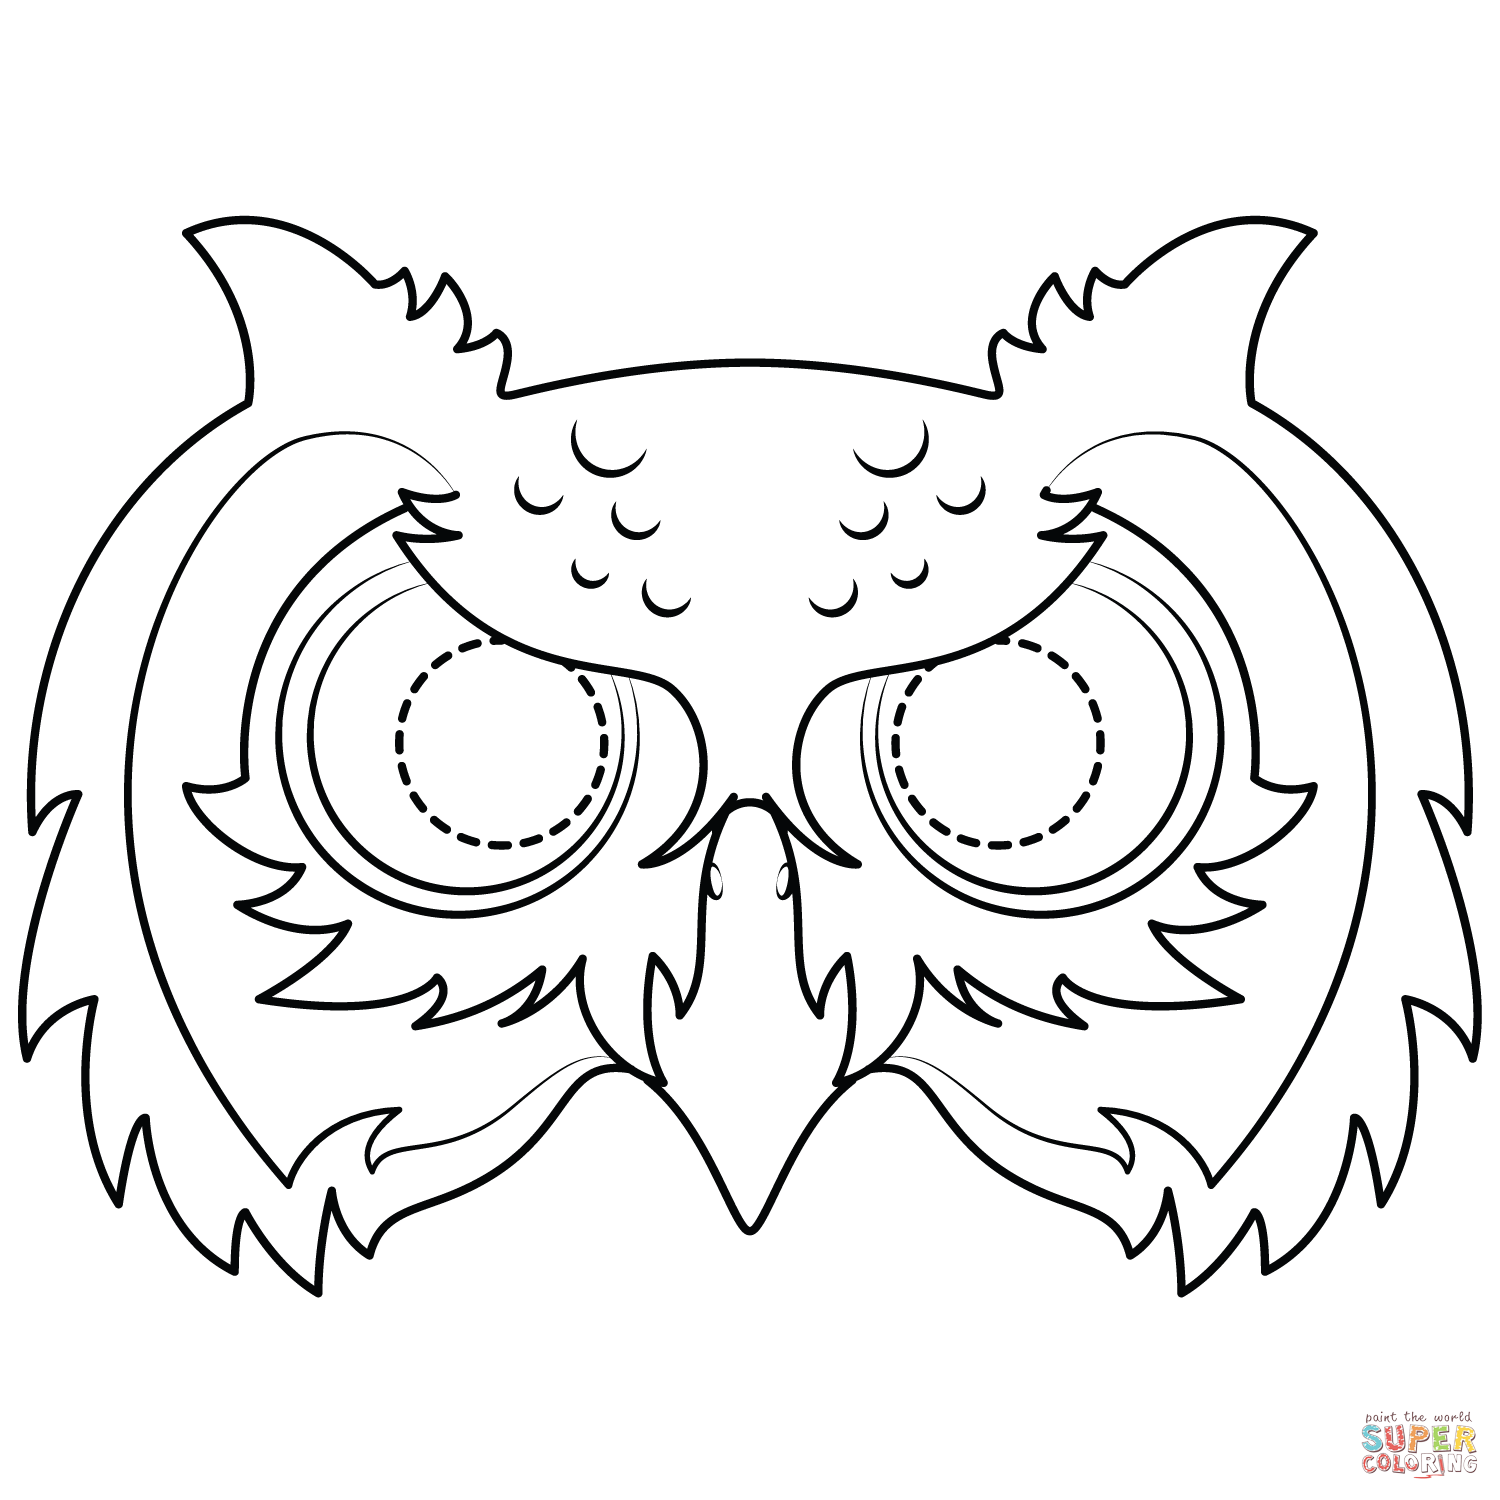 Owl Mask coloring page | Free Printable Coloring Pages